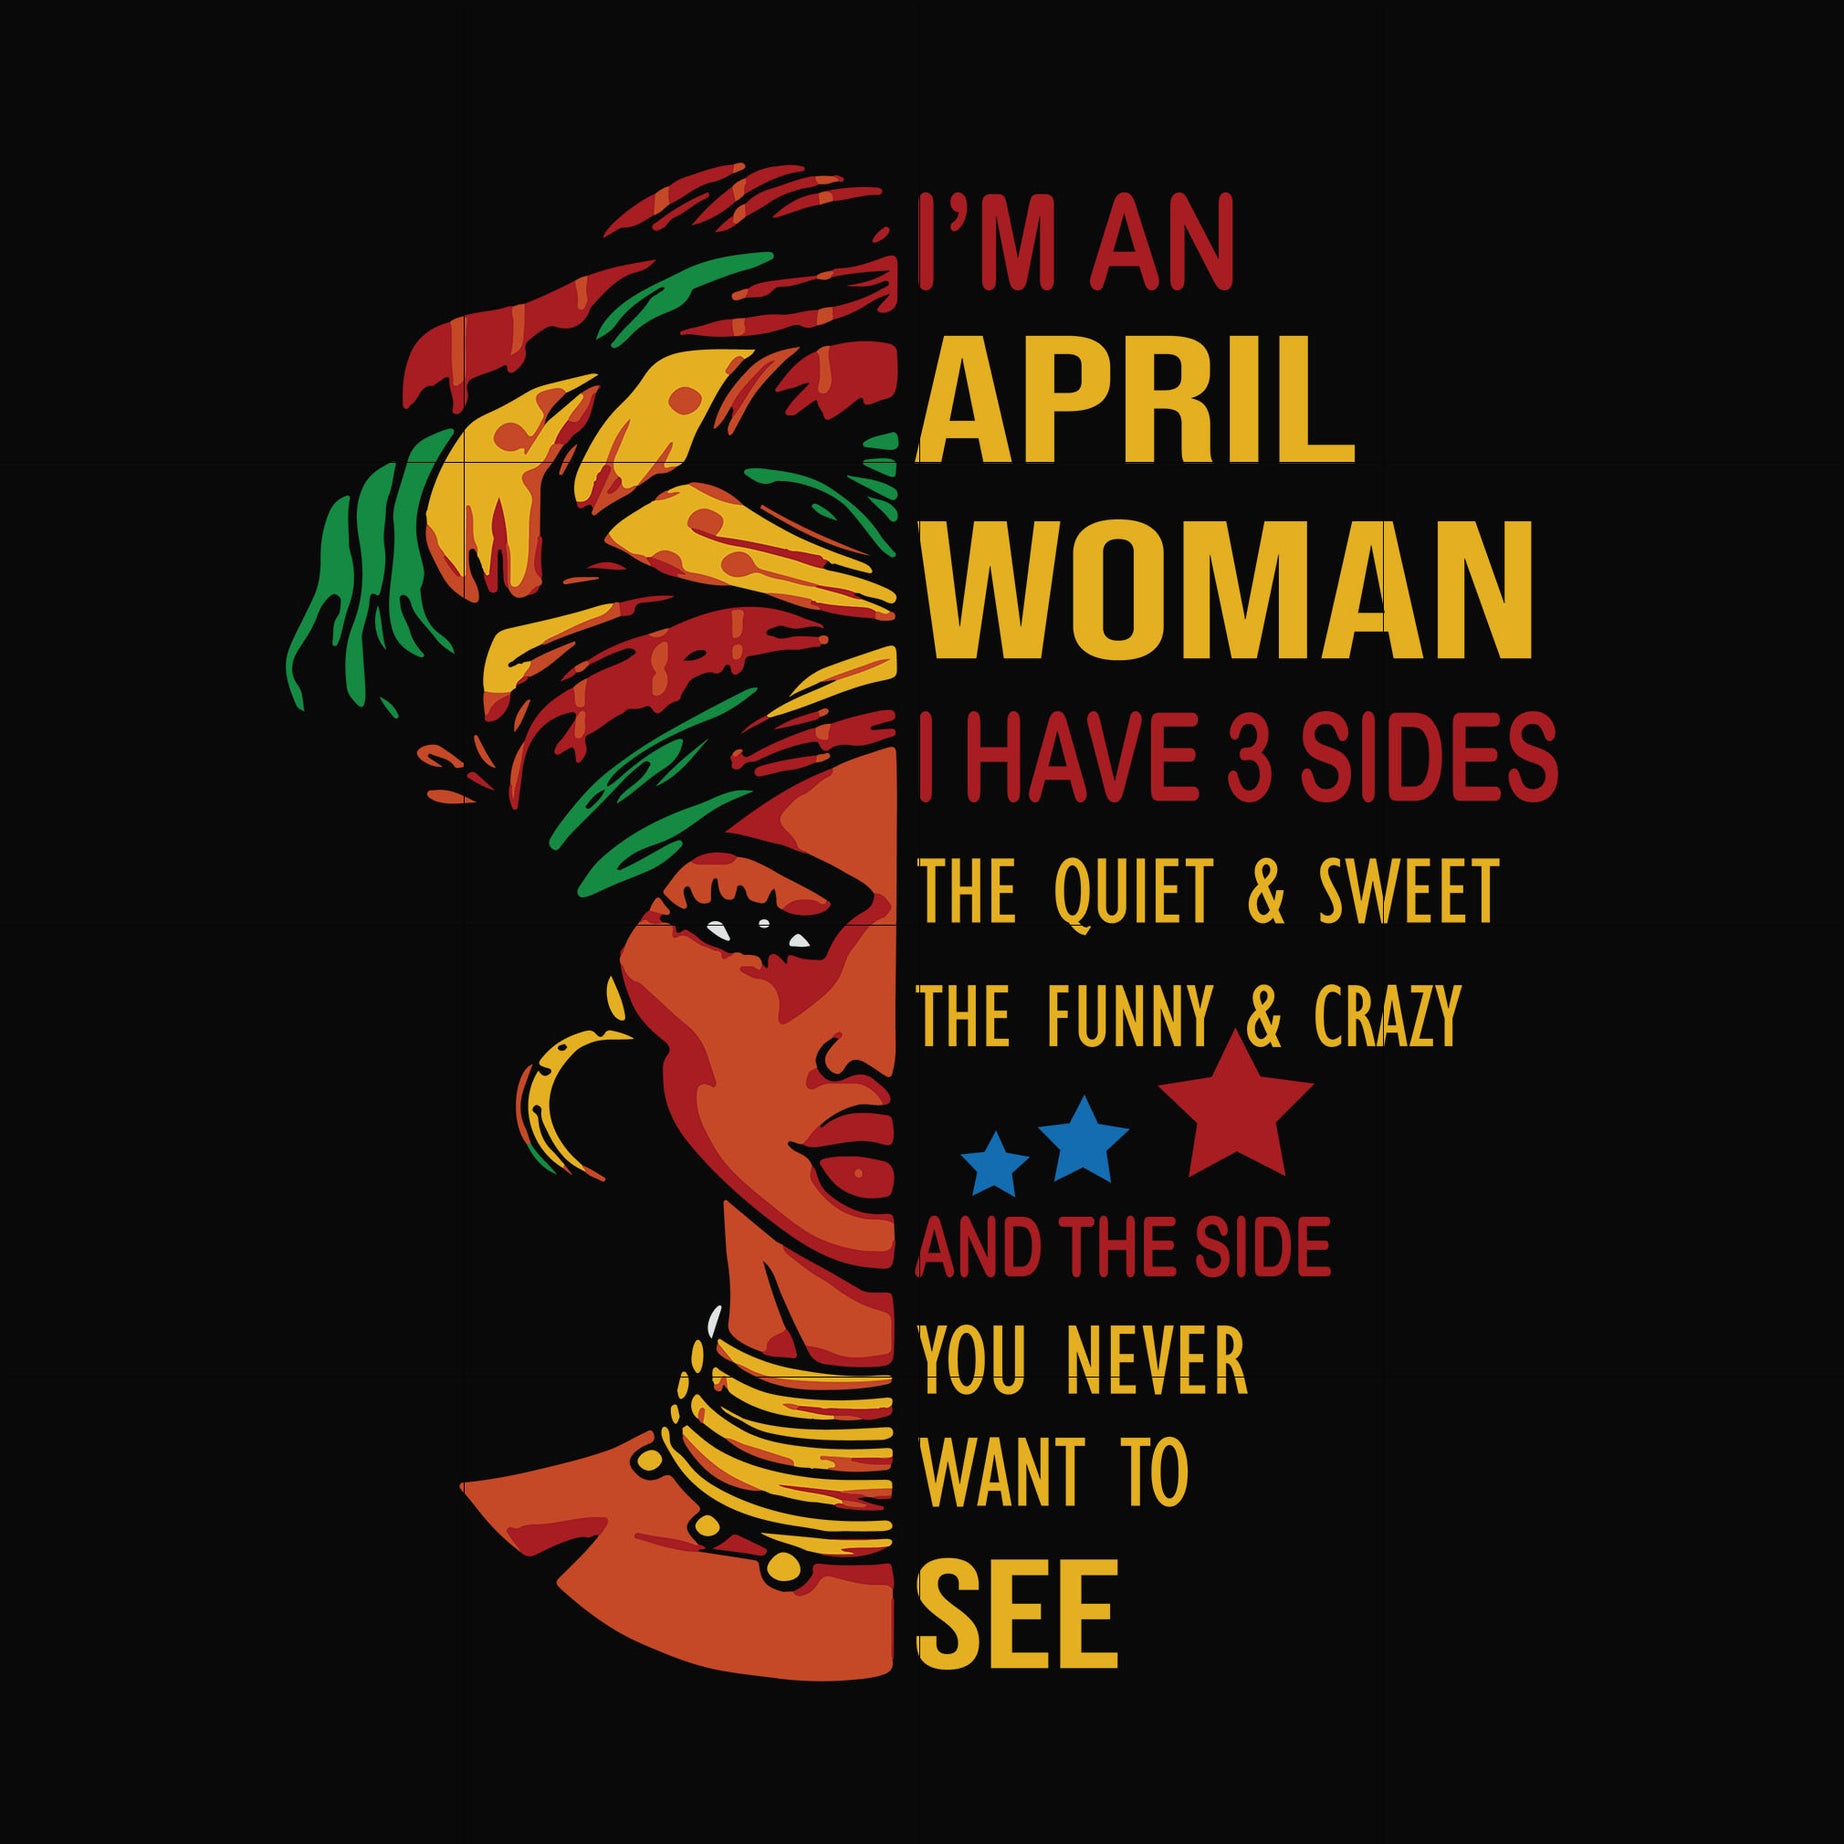 I'm an April woman i have a 3 sides the quiet & sweet the funny & crazy and the side you never want to see svg, birthday svg, png, dxf, eps digital file BD0101